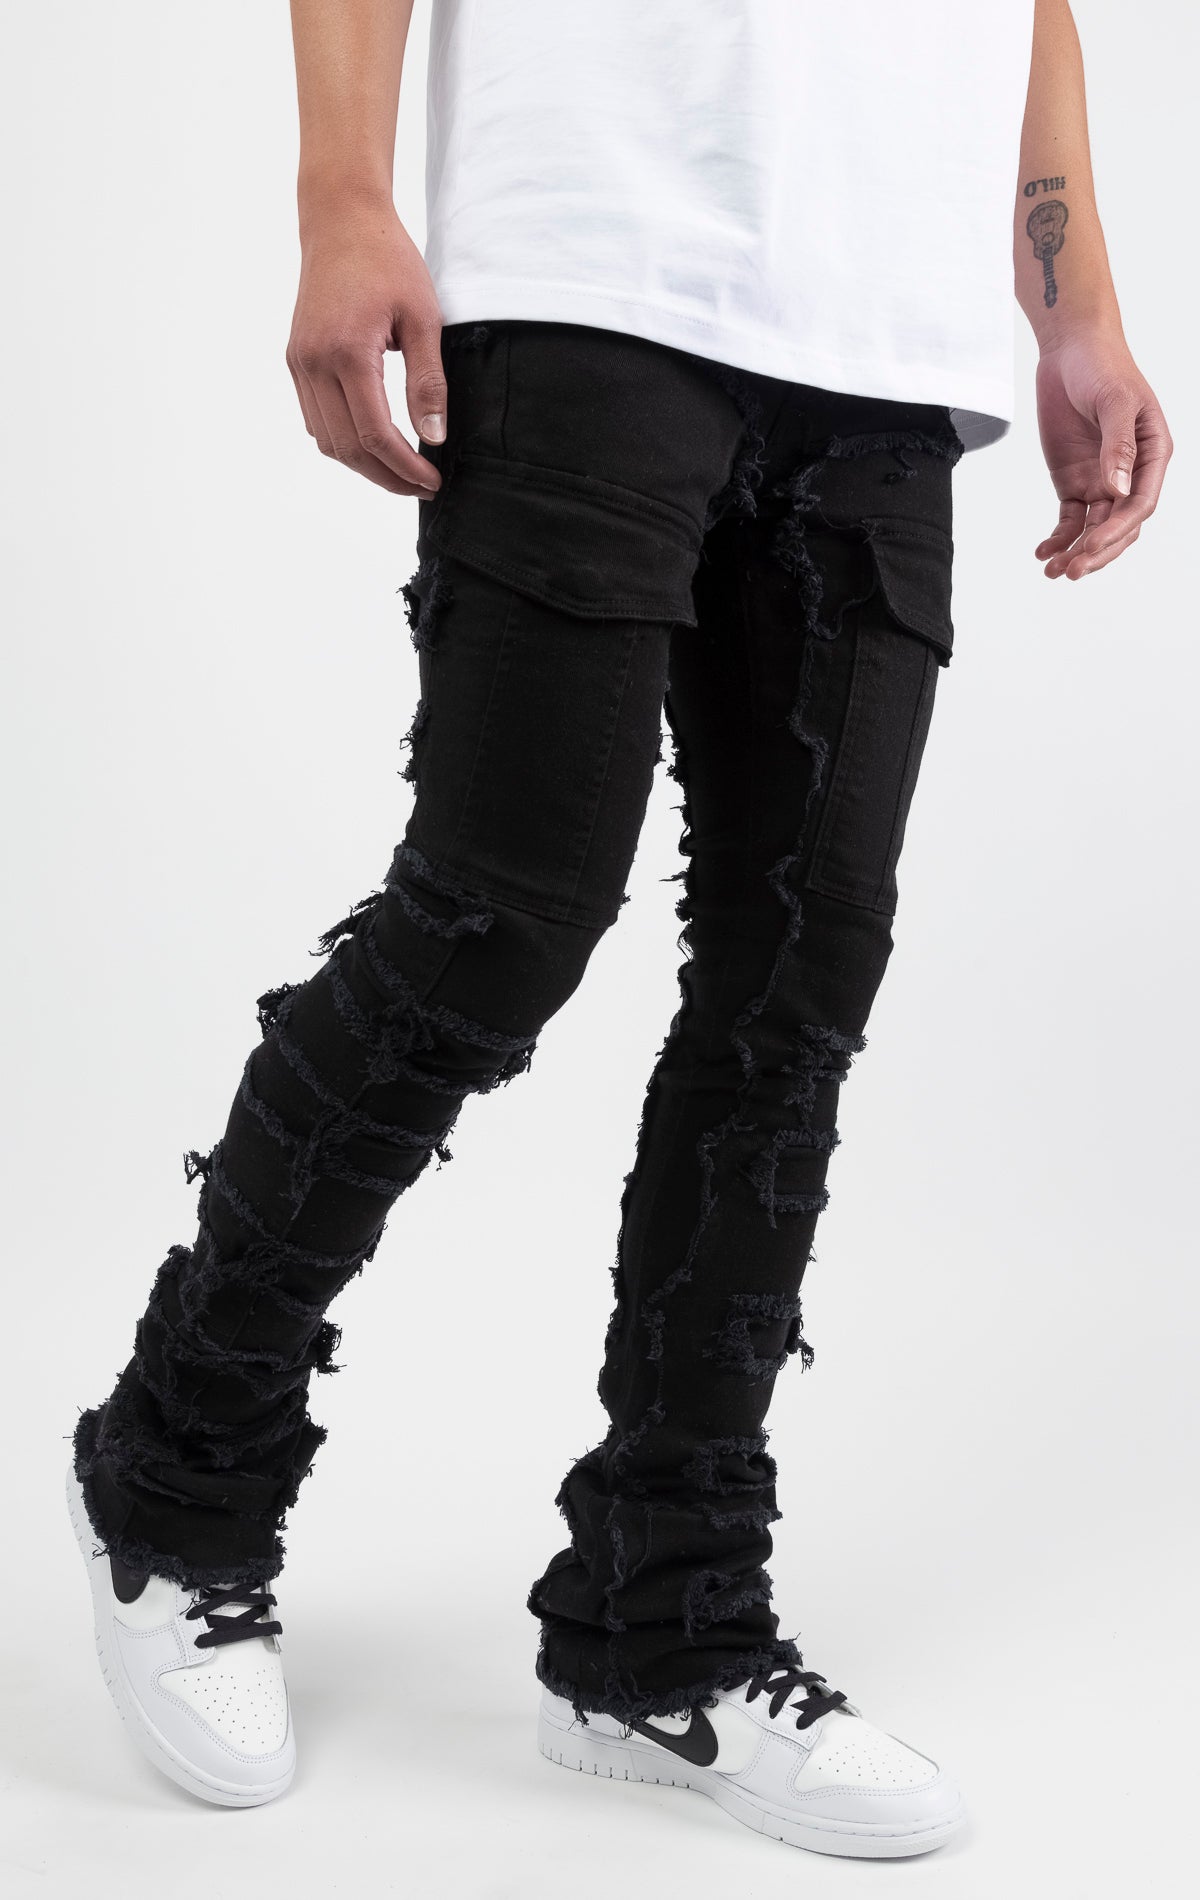 Black Fray panel with stitch design, stacked cargo jeans with classic 5 pockets and flared bottom leg.